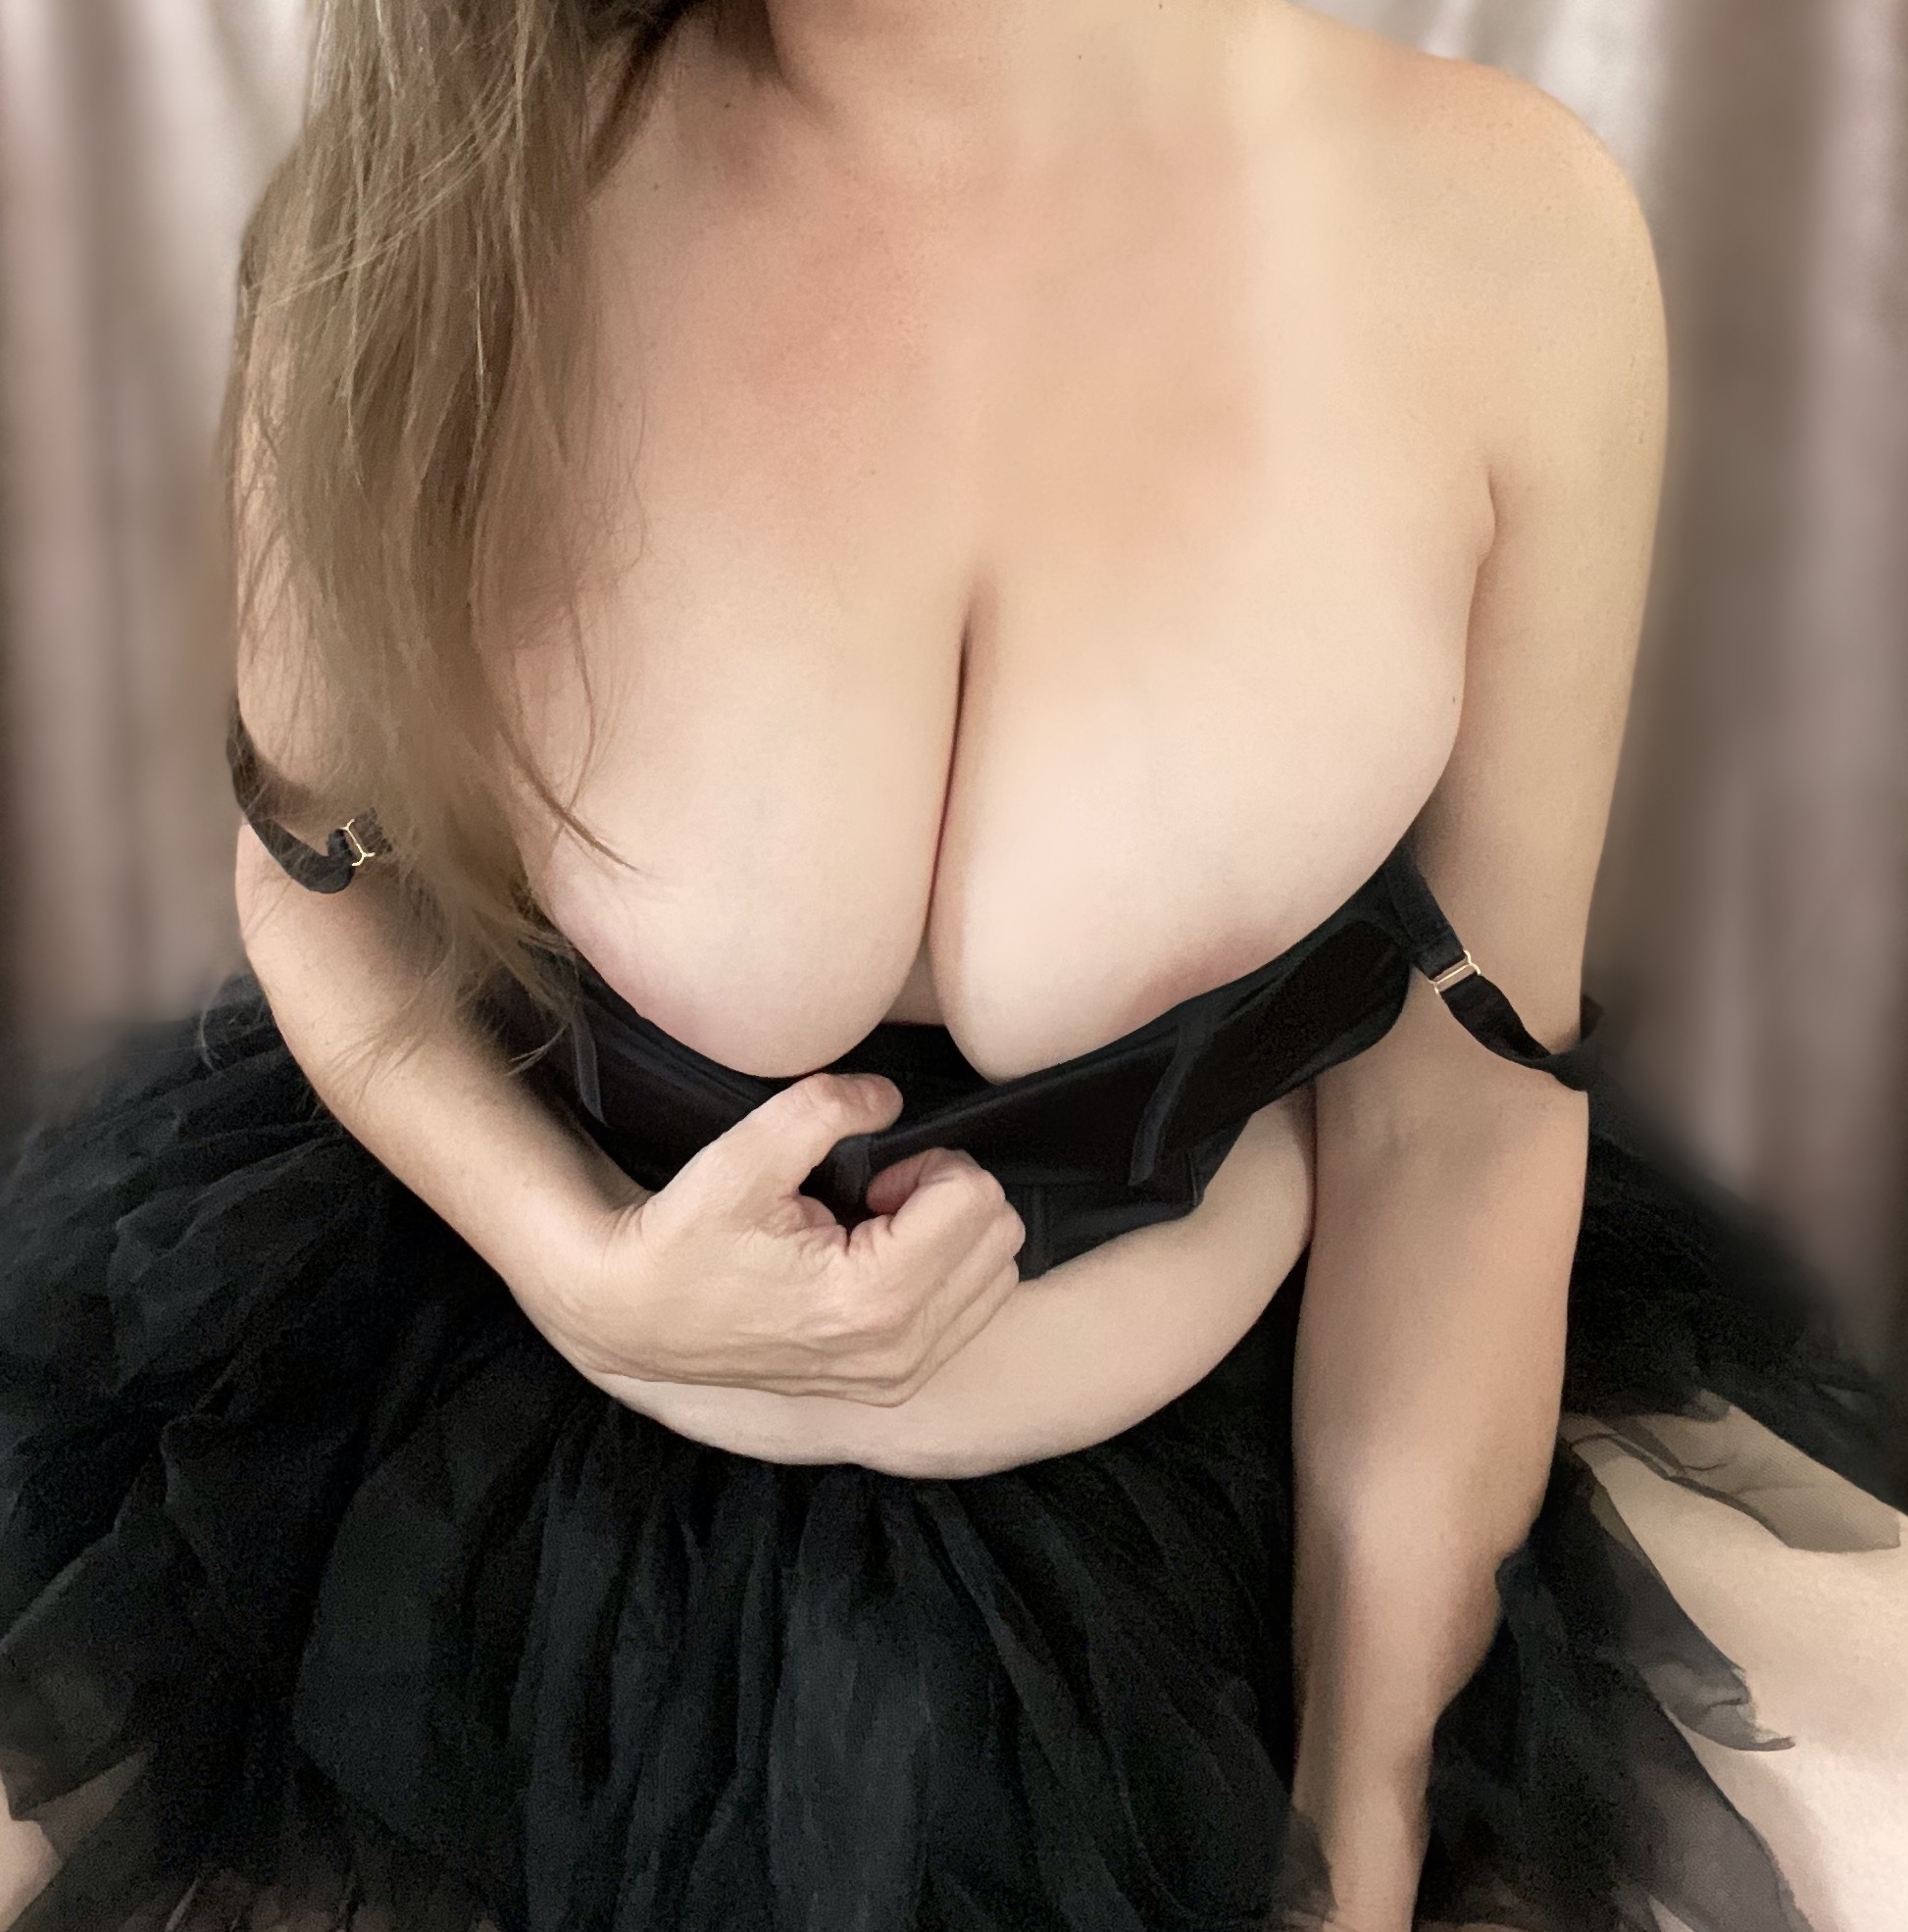 Milf shows off her big tits uncensored